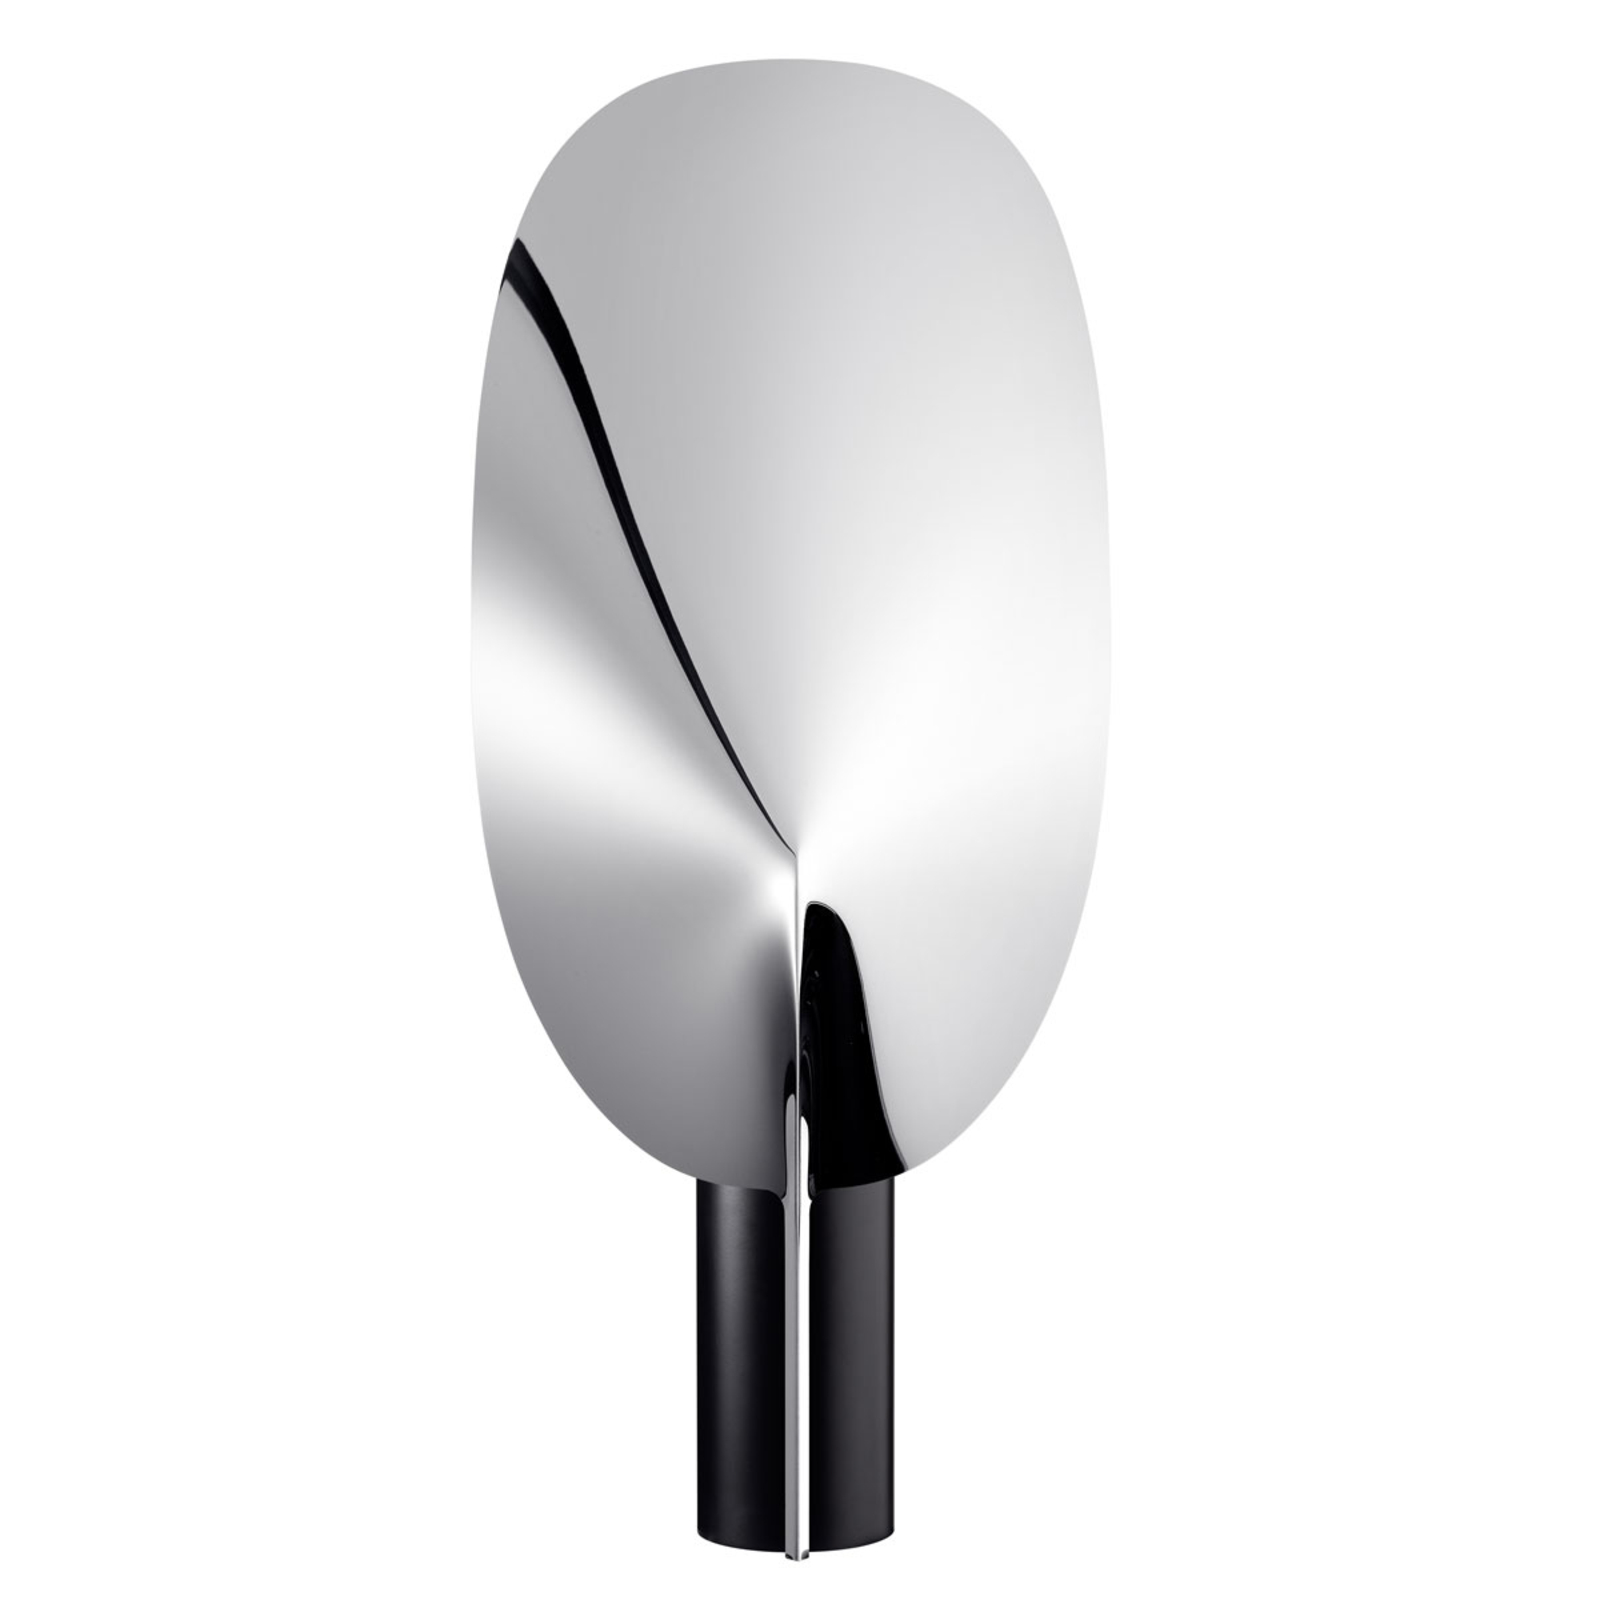 FLOS Serena - dimmable LED table lamp, chrome